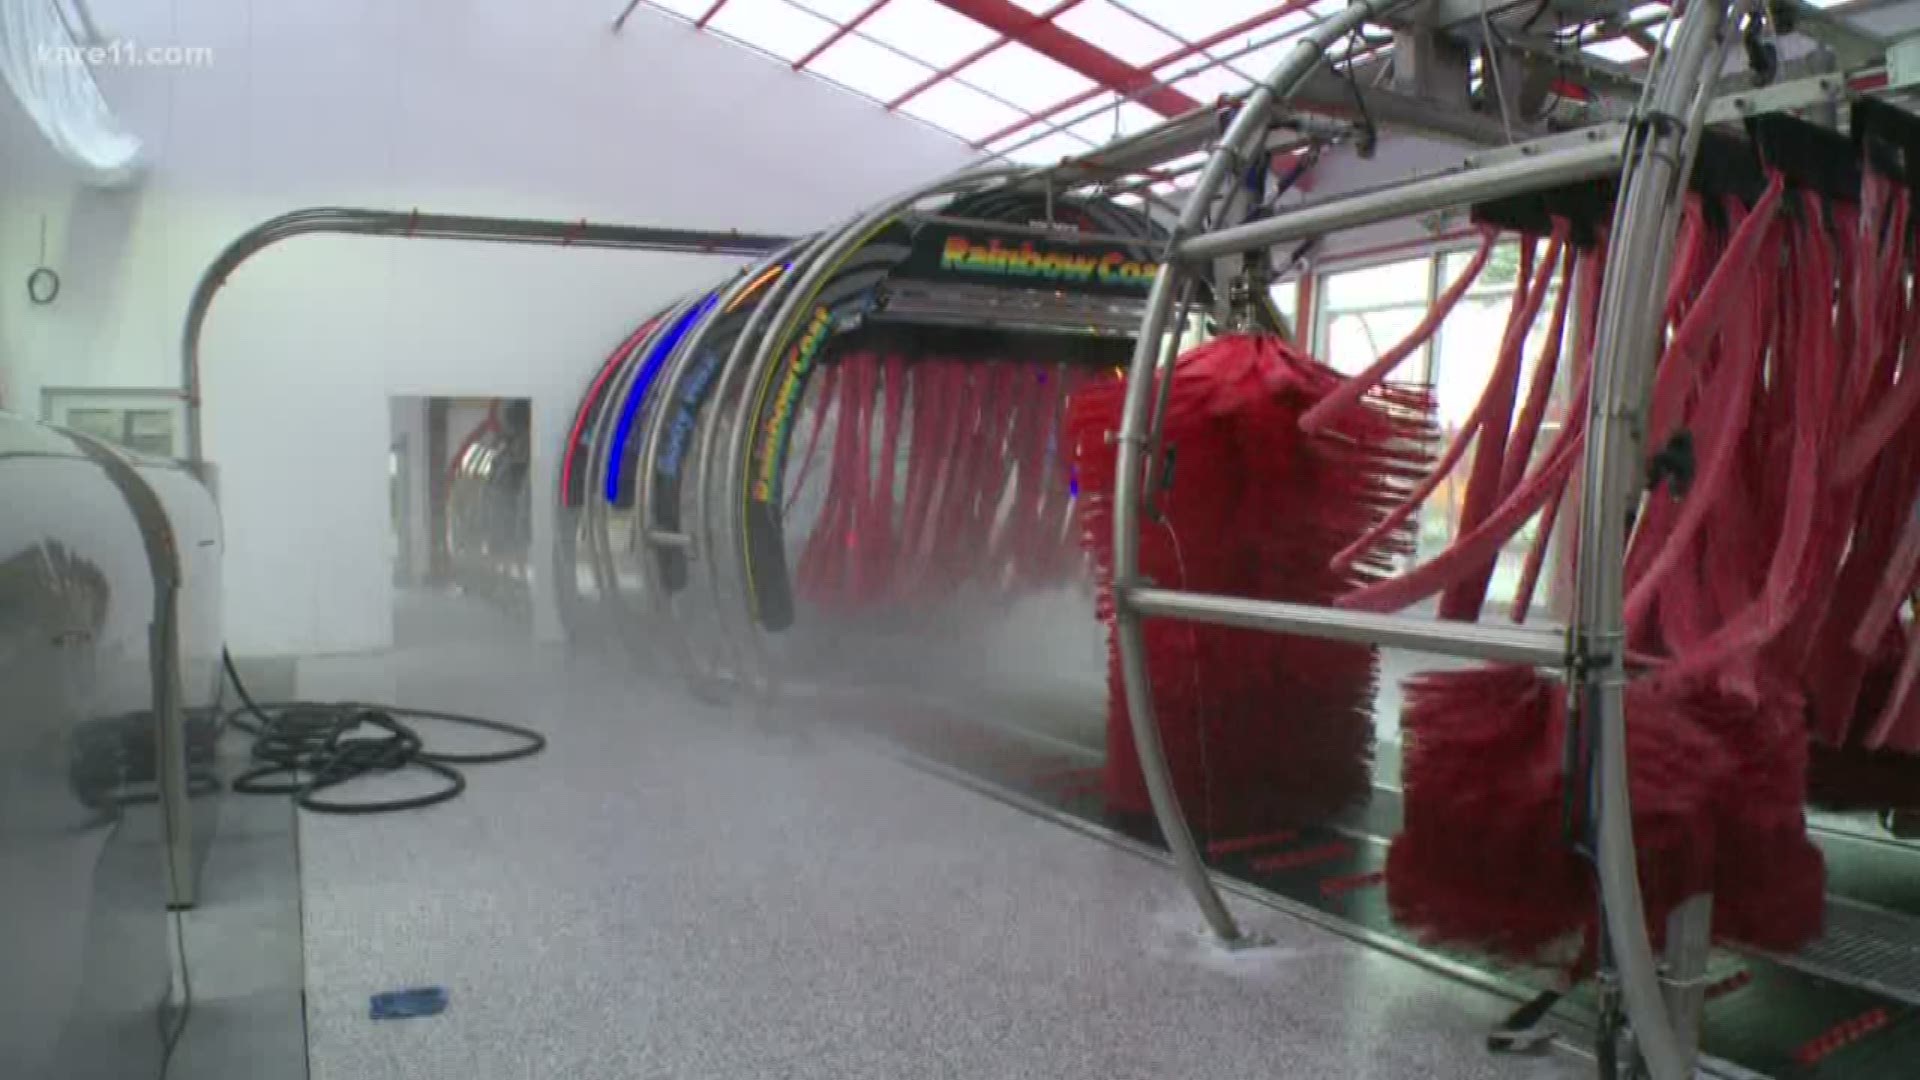 Owner Chris Robbins said they are the first car wash in Minnesota to use a water reclaim system, combined with a rainwater harvesting system to clean vehicles.